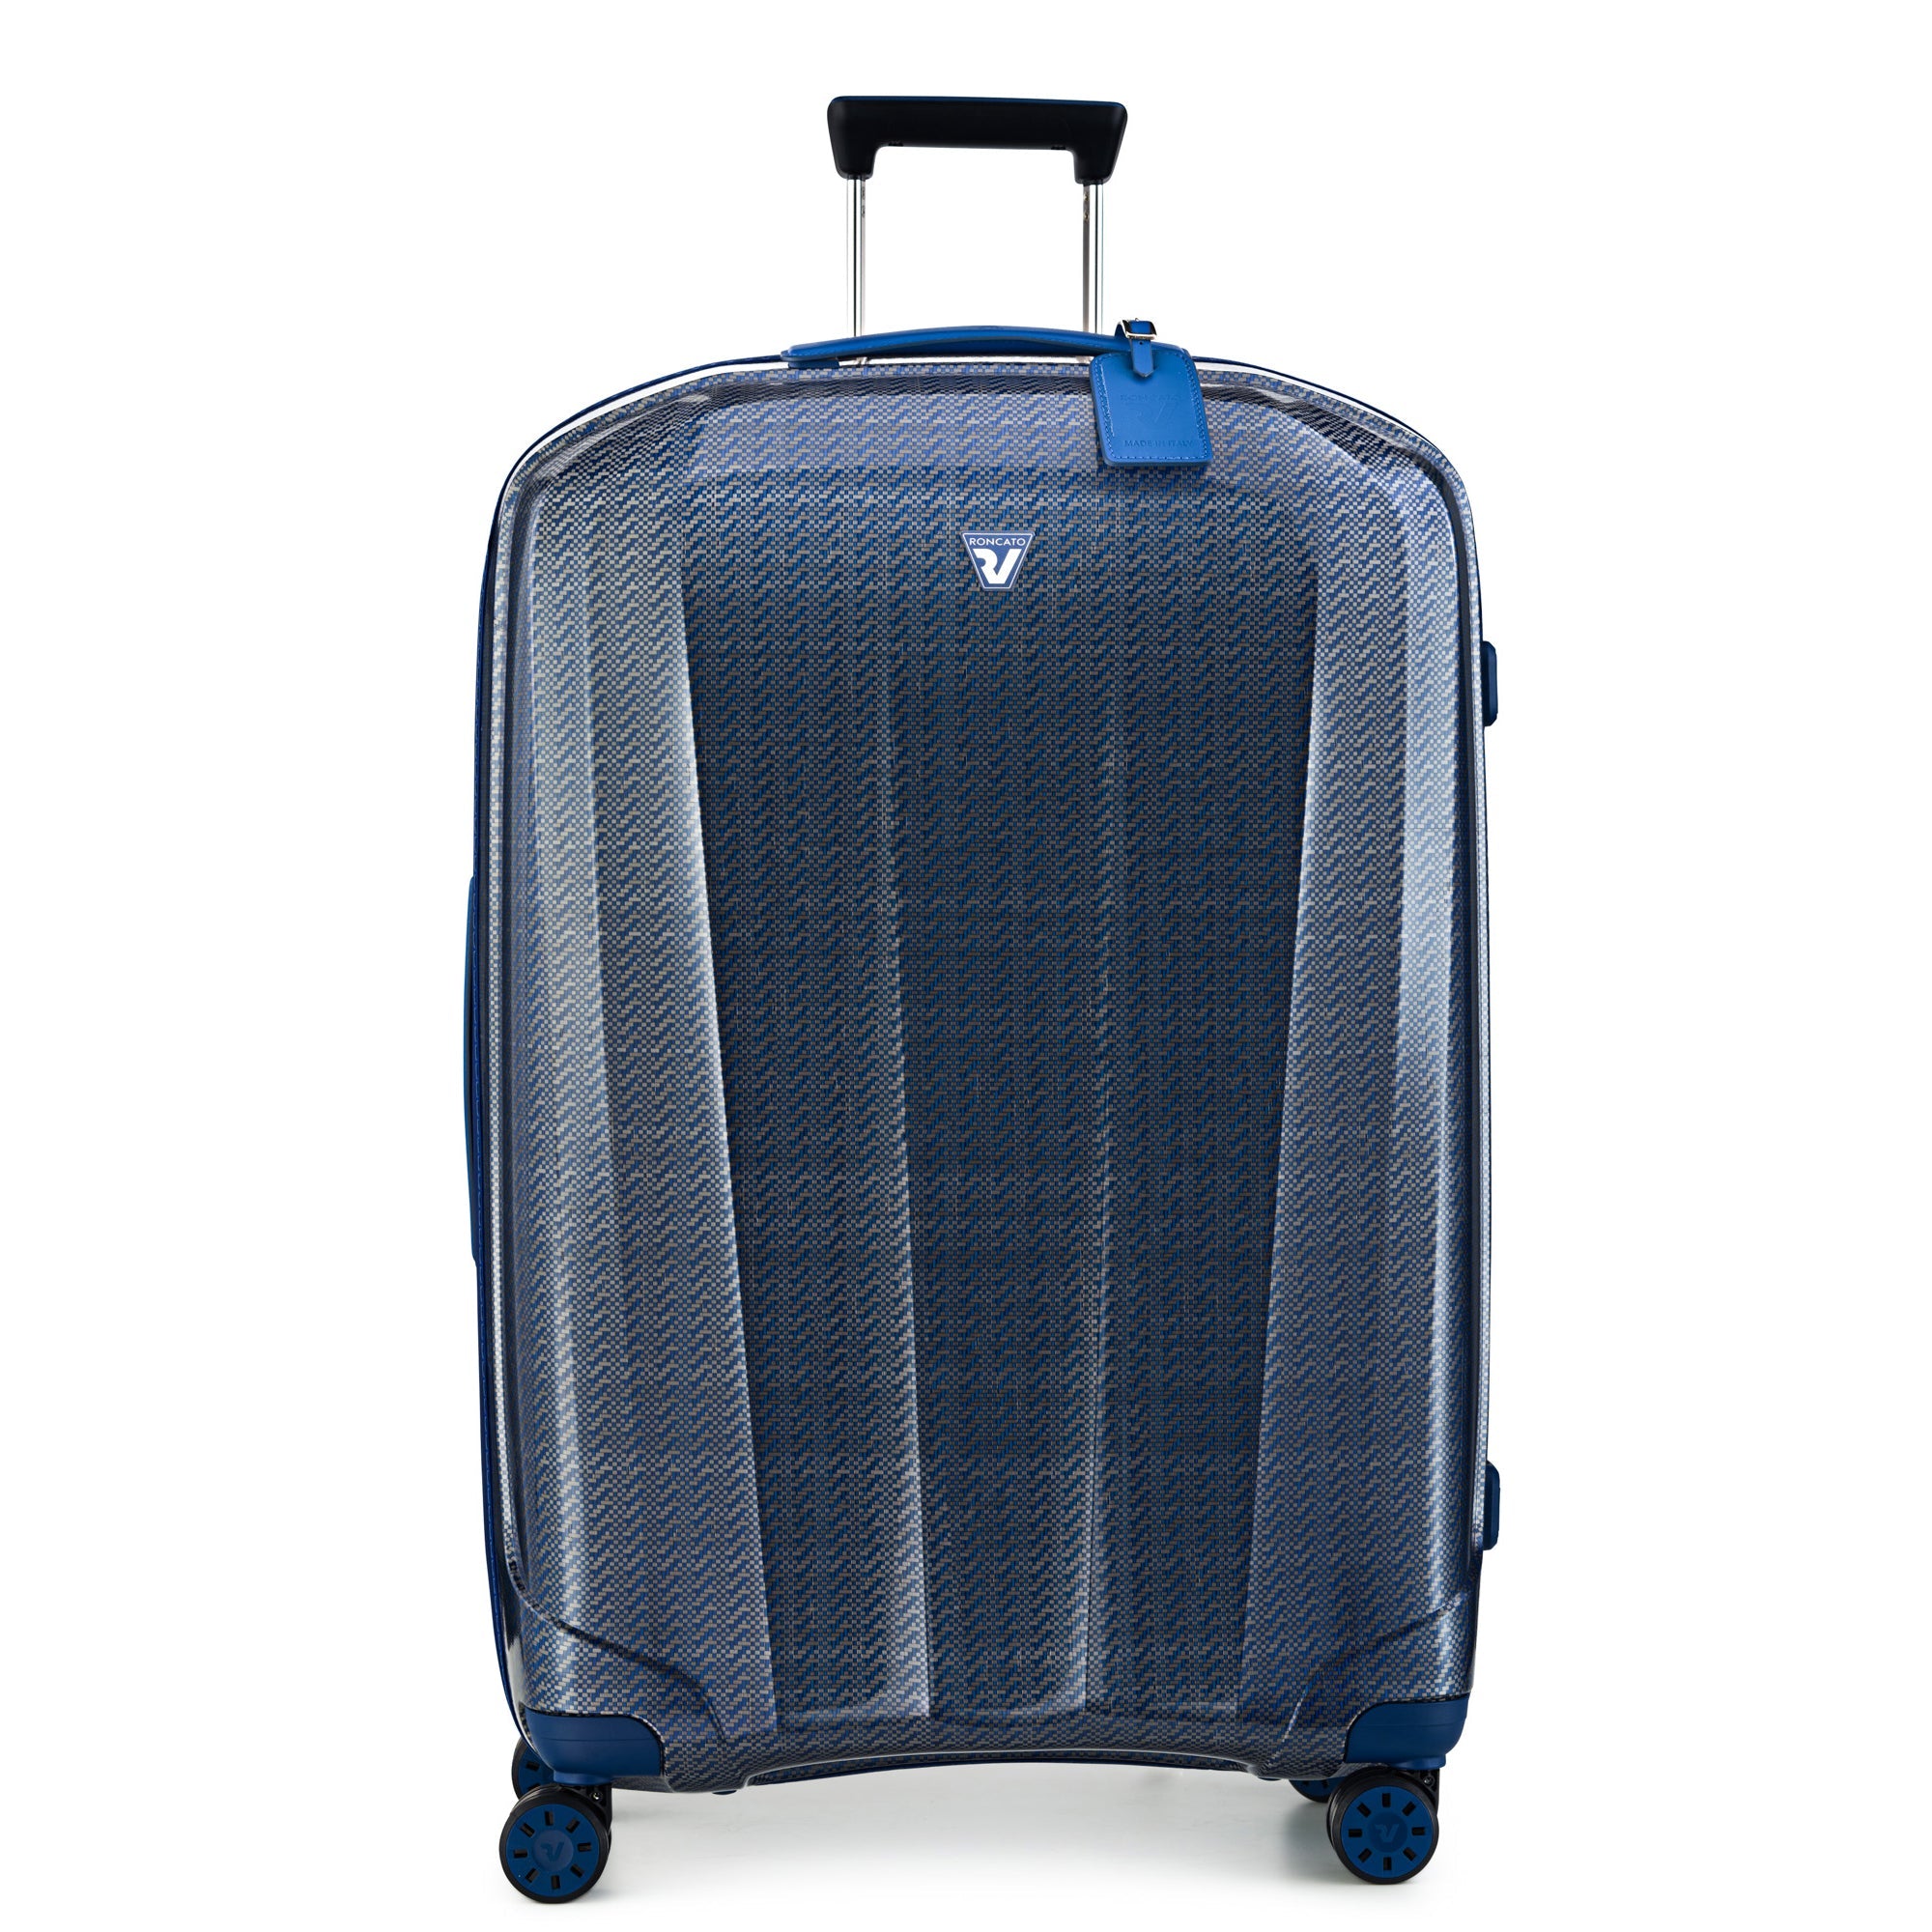 RONCATO WE ARE TEXTURE HARD LUGGAGE BLUE 30